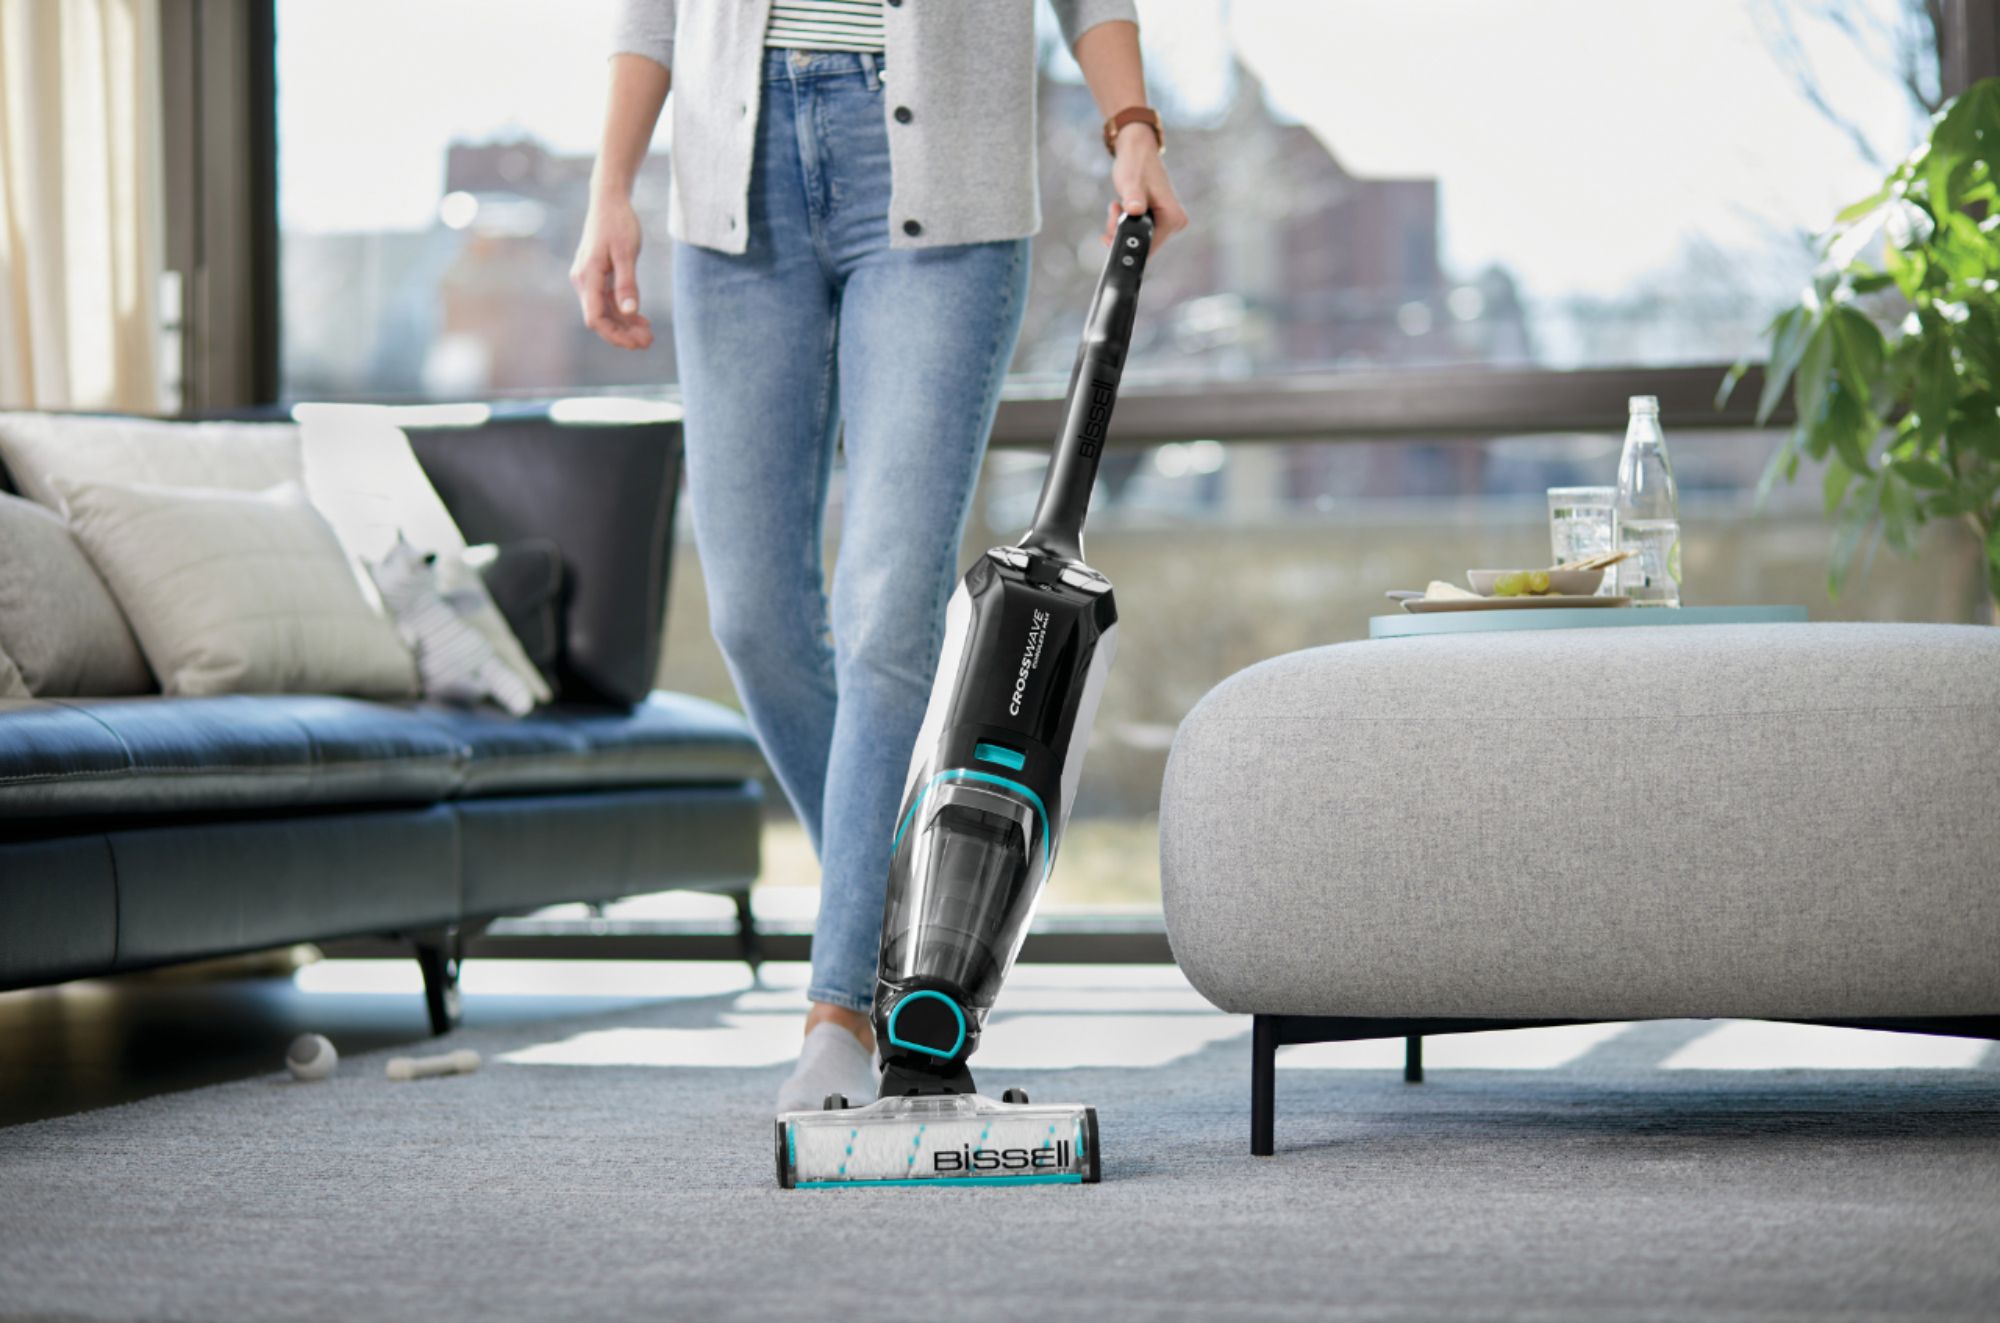 Bissell CrossWave Cordless Max Multi-Surface Upright Carpet Cleaner -  Tahlequah Lumber